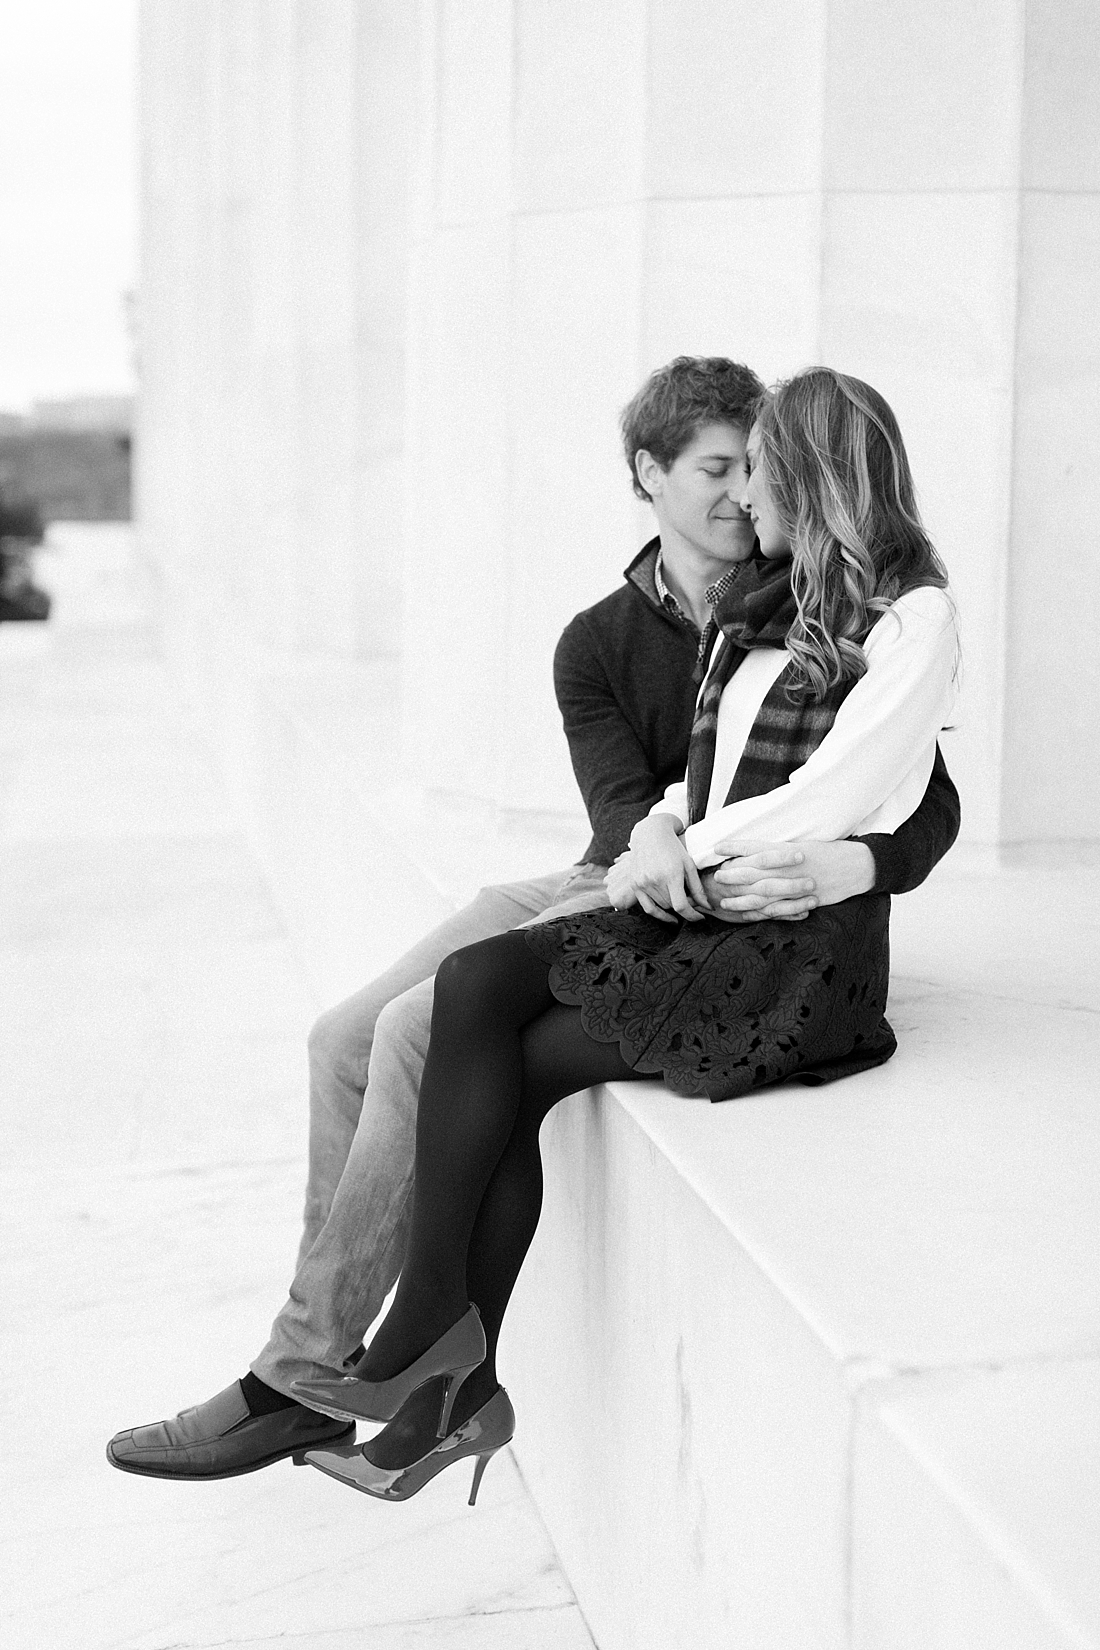 Washington DC engagement session at the Lincoln Memorial